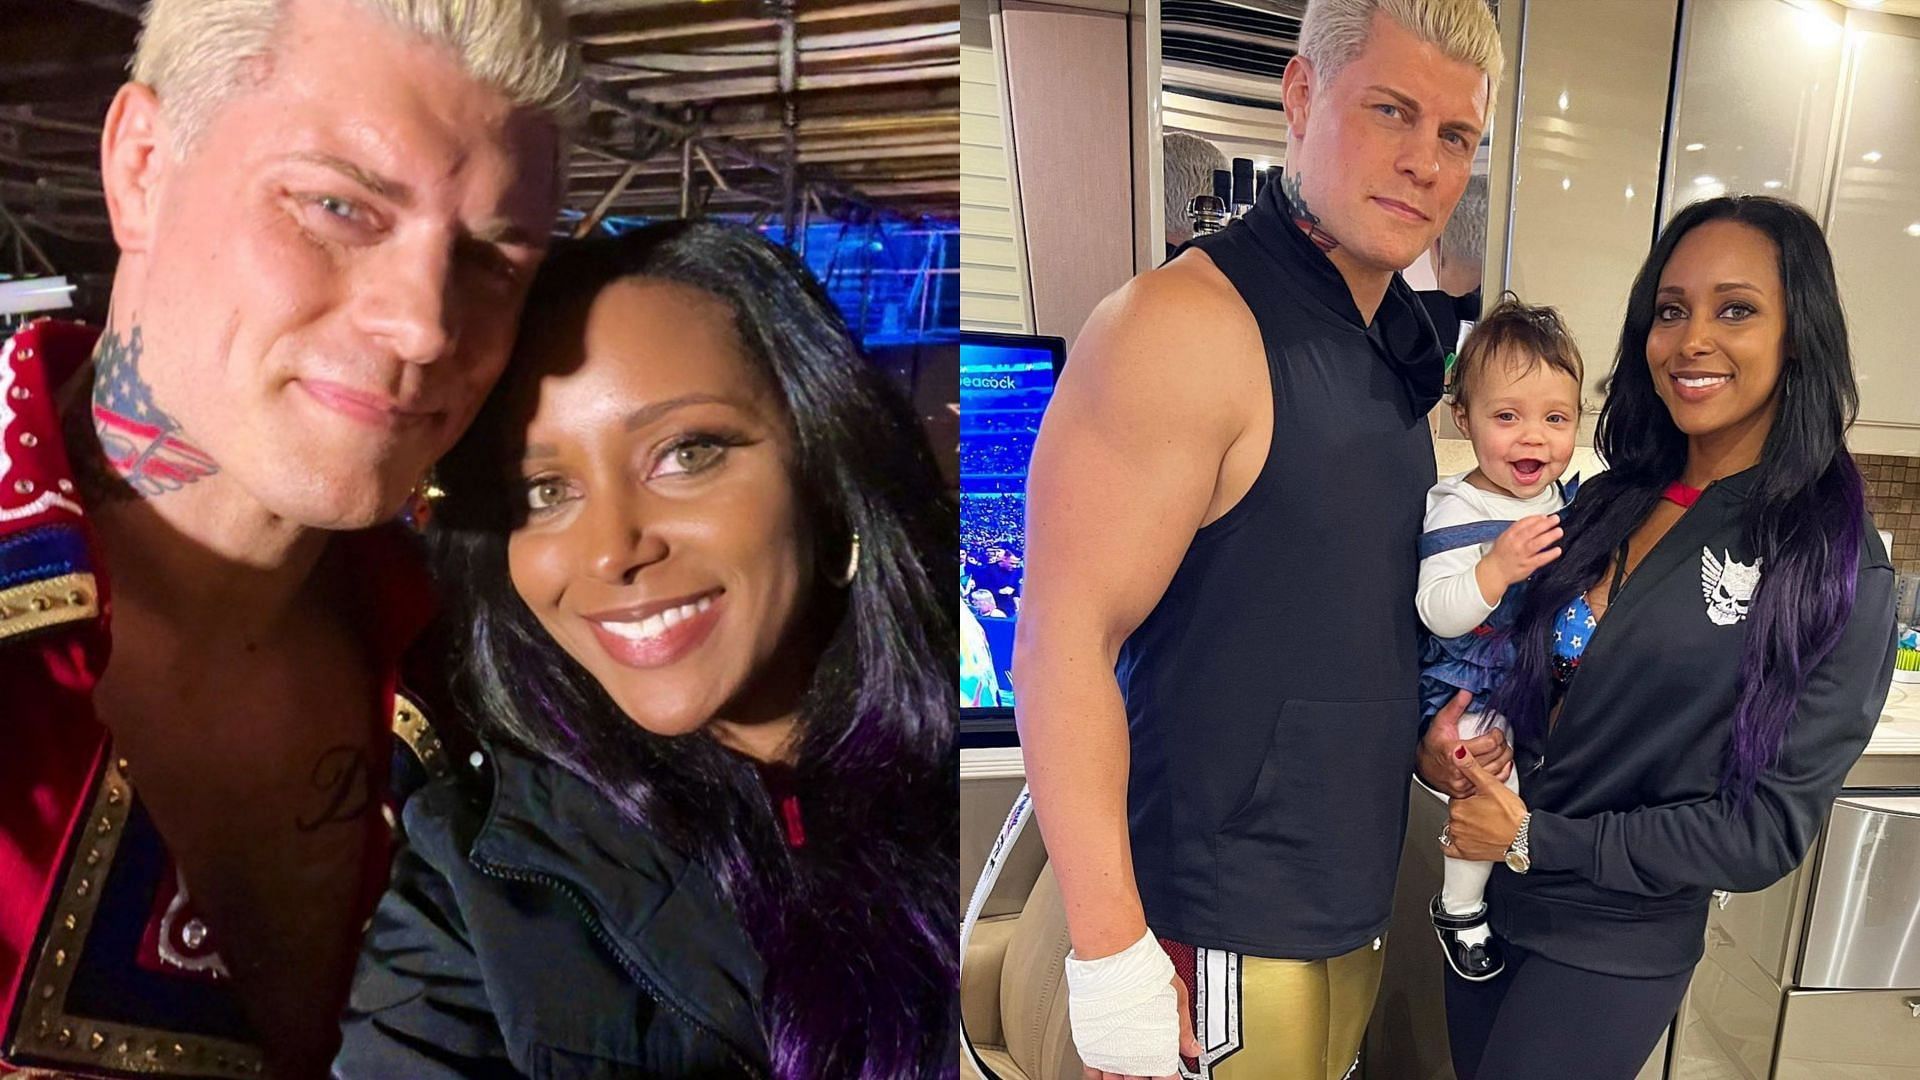 Cody Rhodes is younger than his wife, Brandi